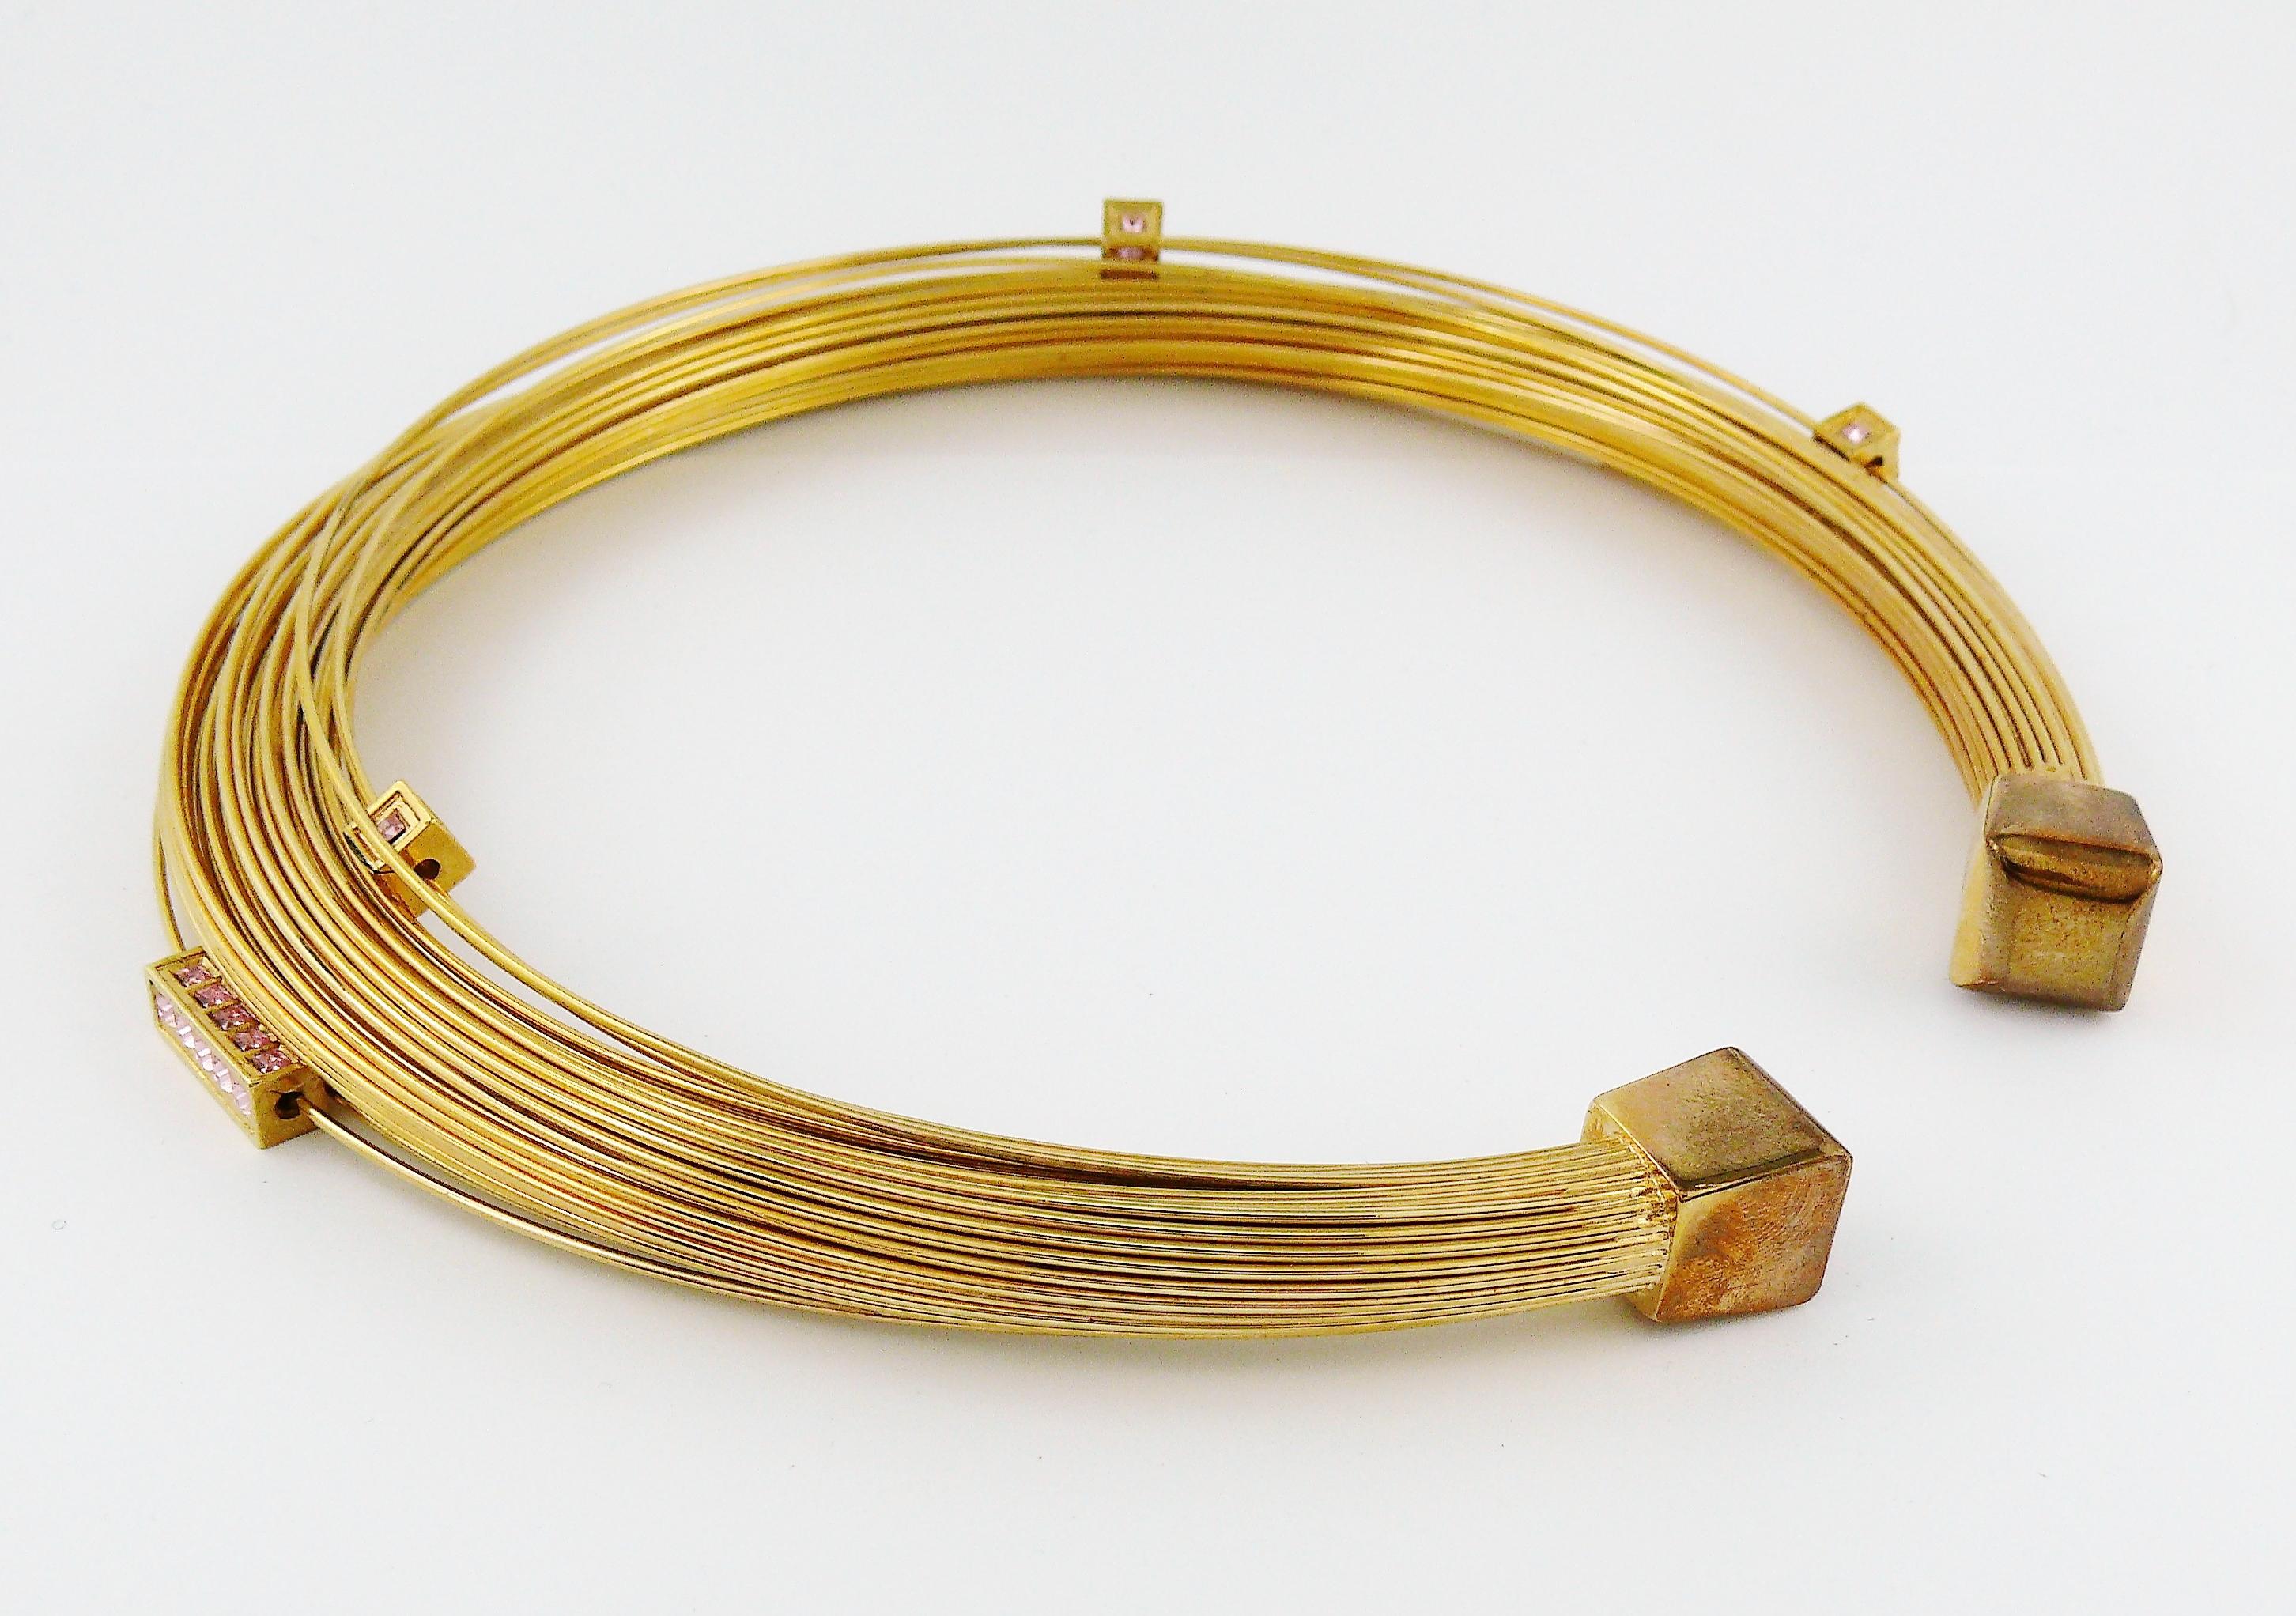 Thierry Mugler Vintage Gold Toned Bundled Wires Choker Necklace For Sale 1